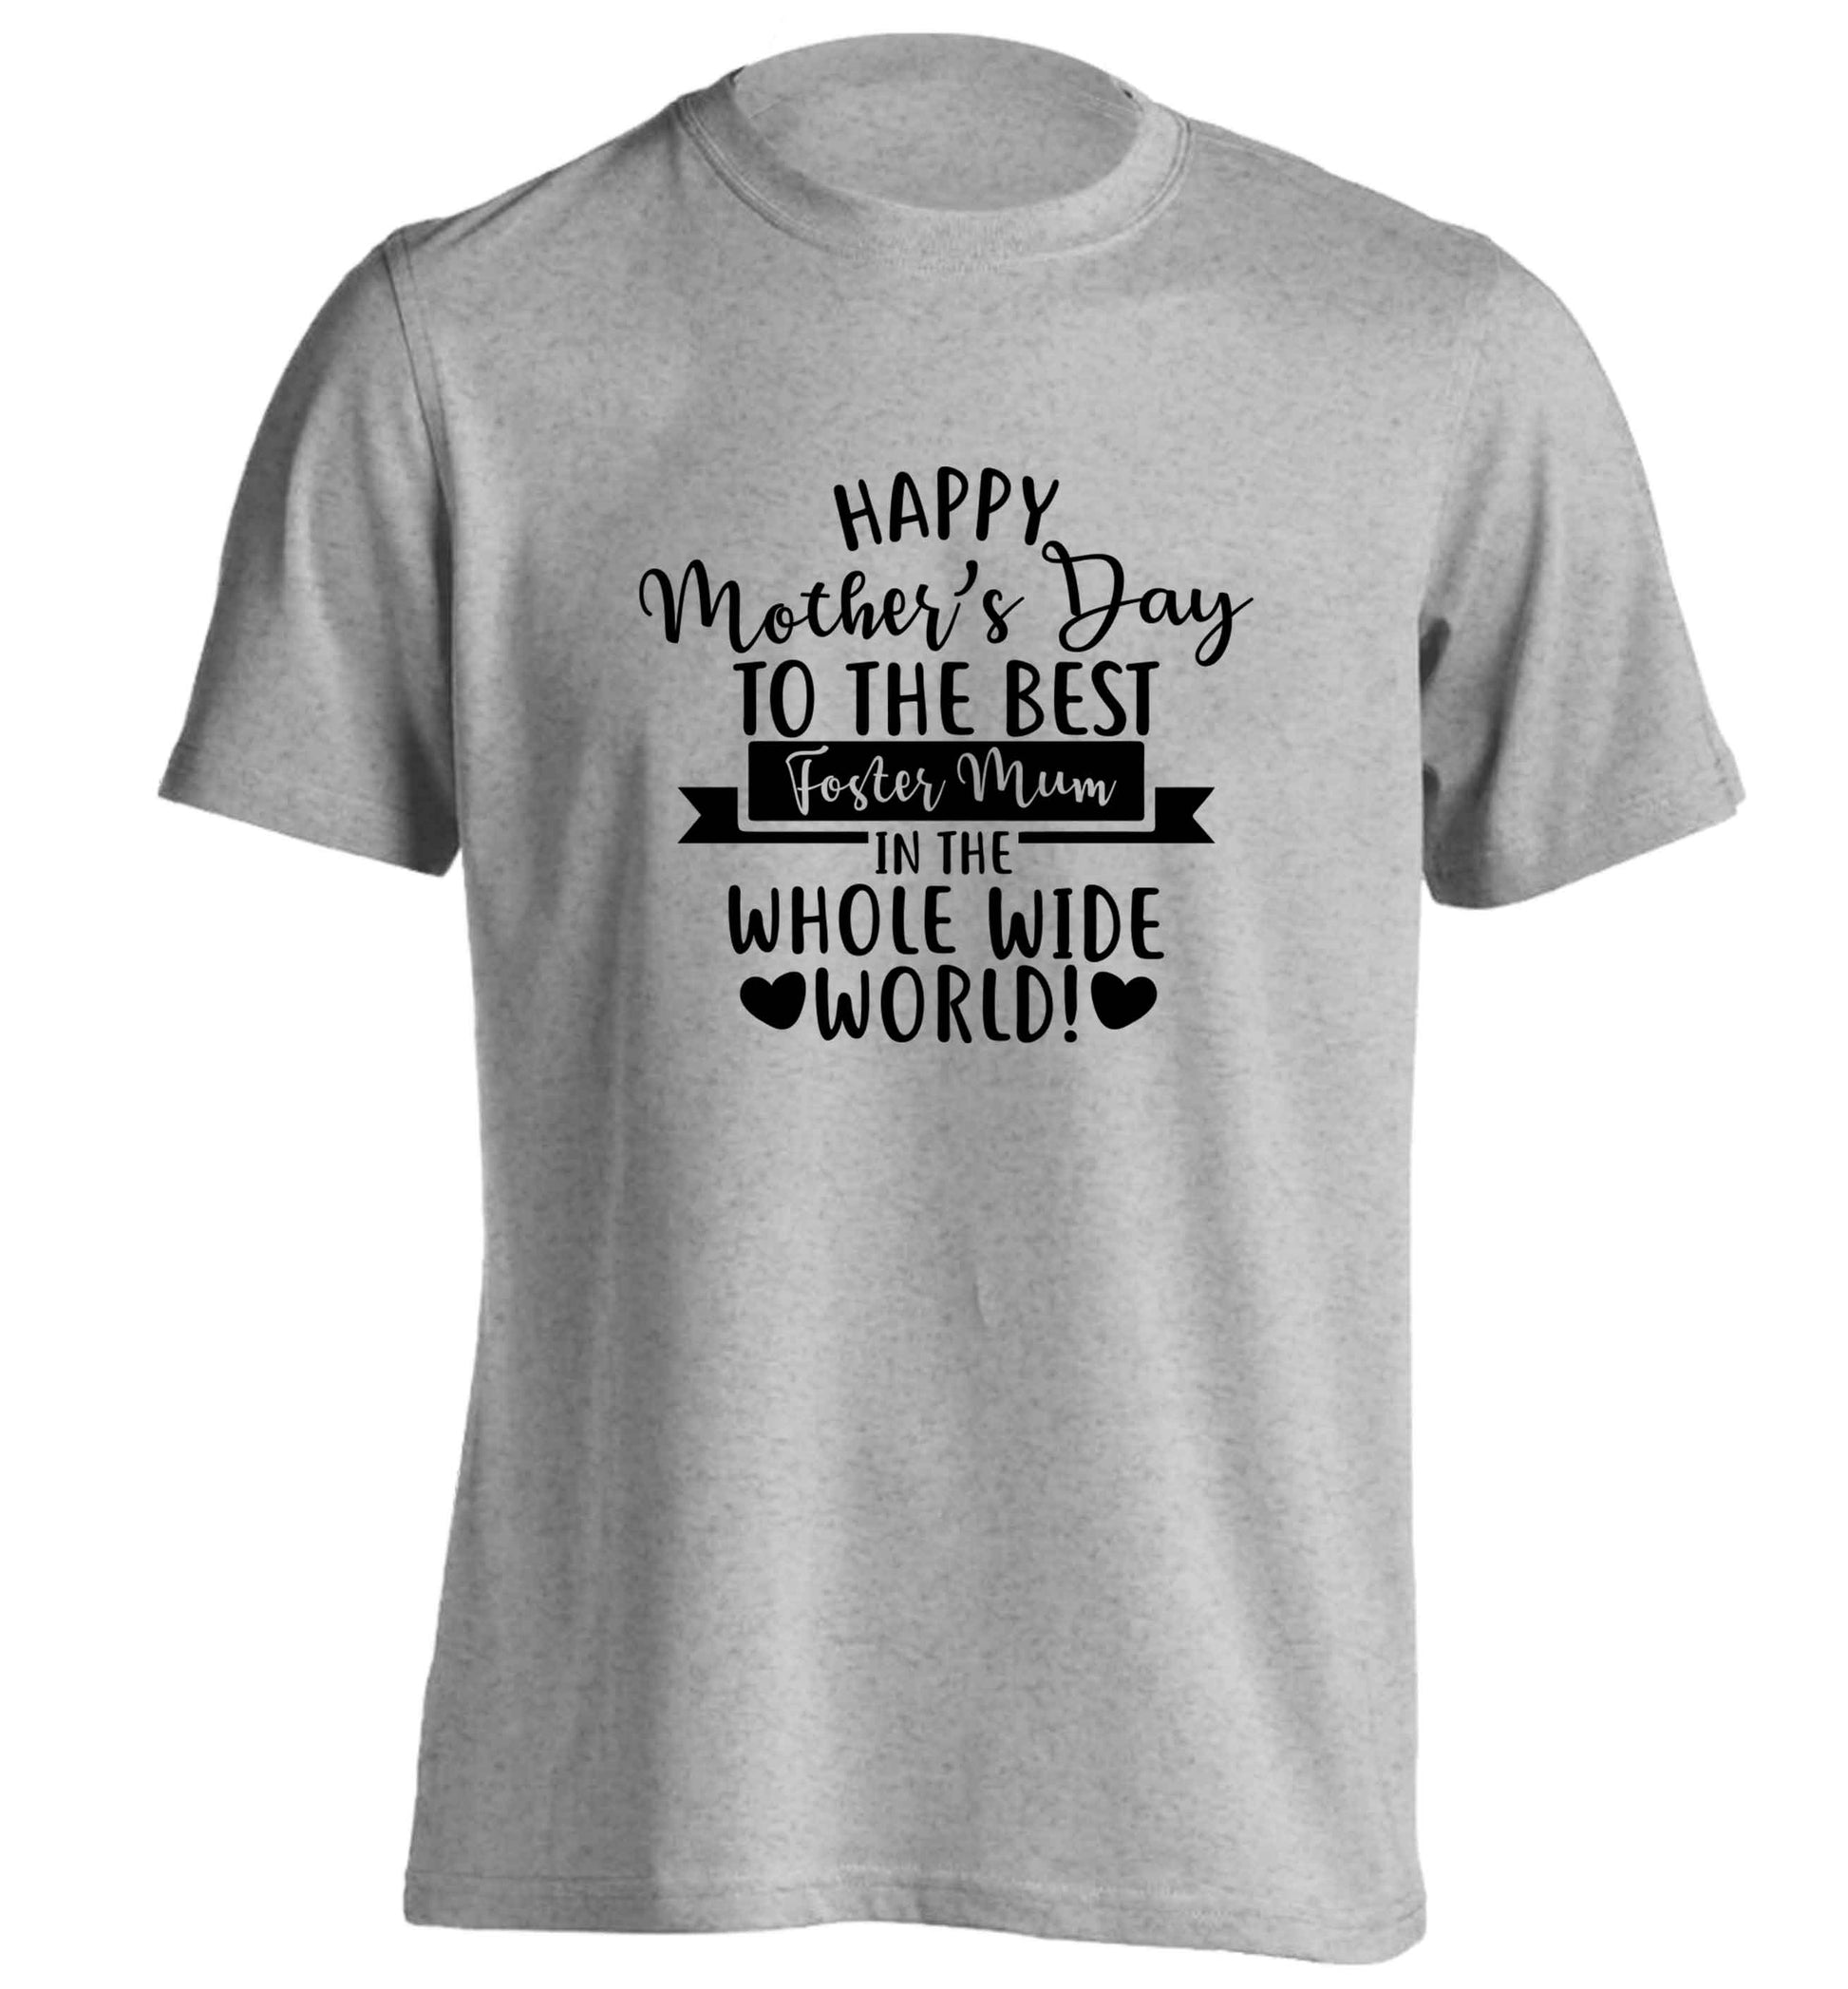 Happy mother's day to the best foster mum in the world adults unisex grey Tshirt 2XL